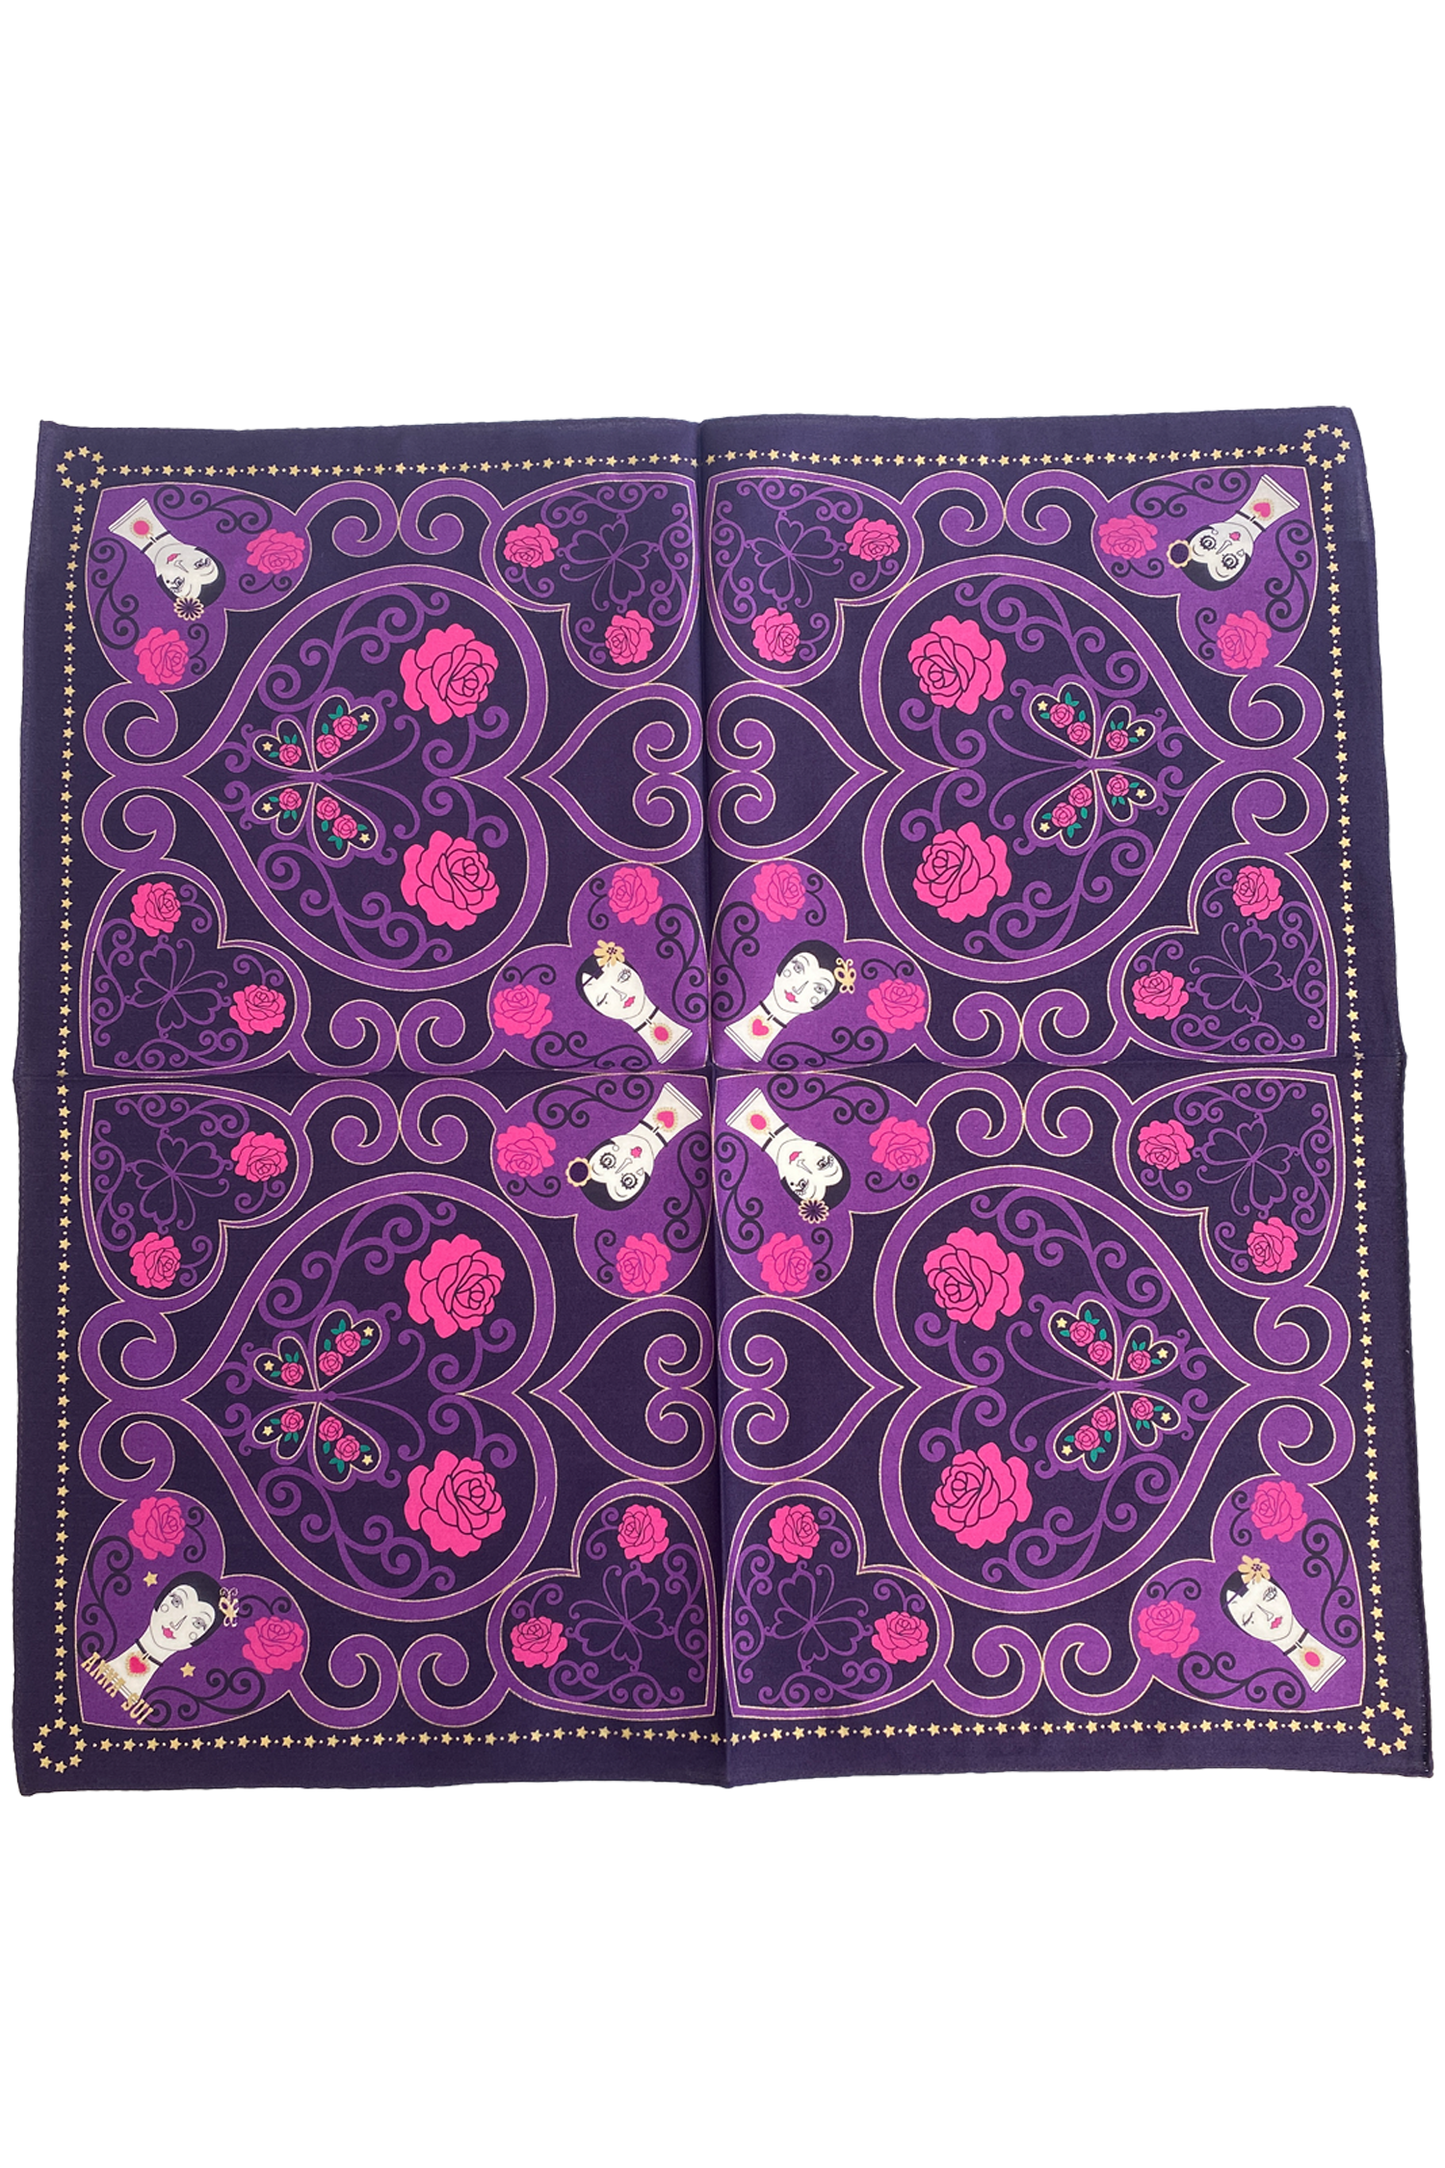 Handkerchief purple, purples hearts Anna’s dolly head, red roses in a corners and center, golden stars